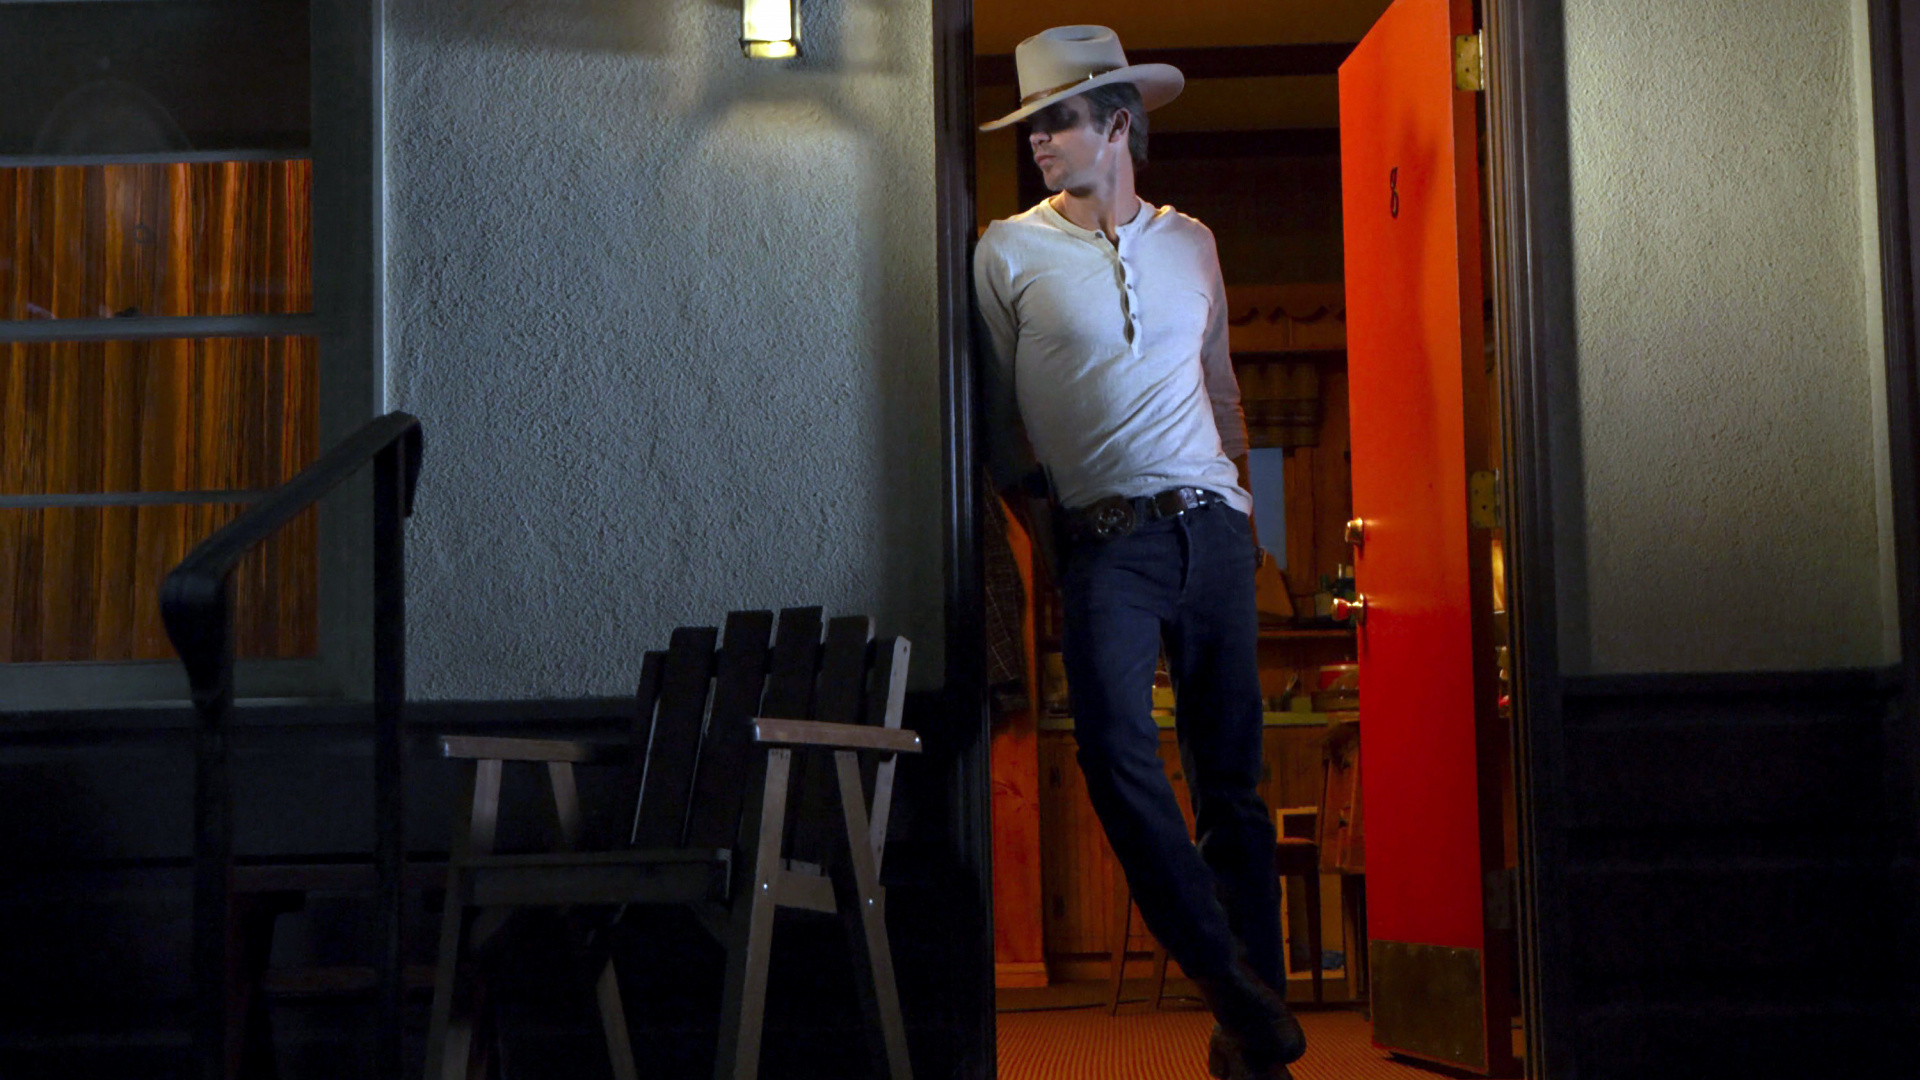 Justified TV Series, Cast promo photos, Timothy Olyphant, Desktop and mobile backgrounds, 1920x1080 Full HD Desktop